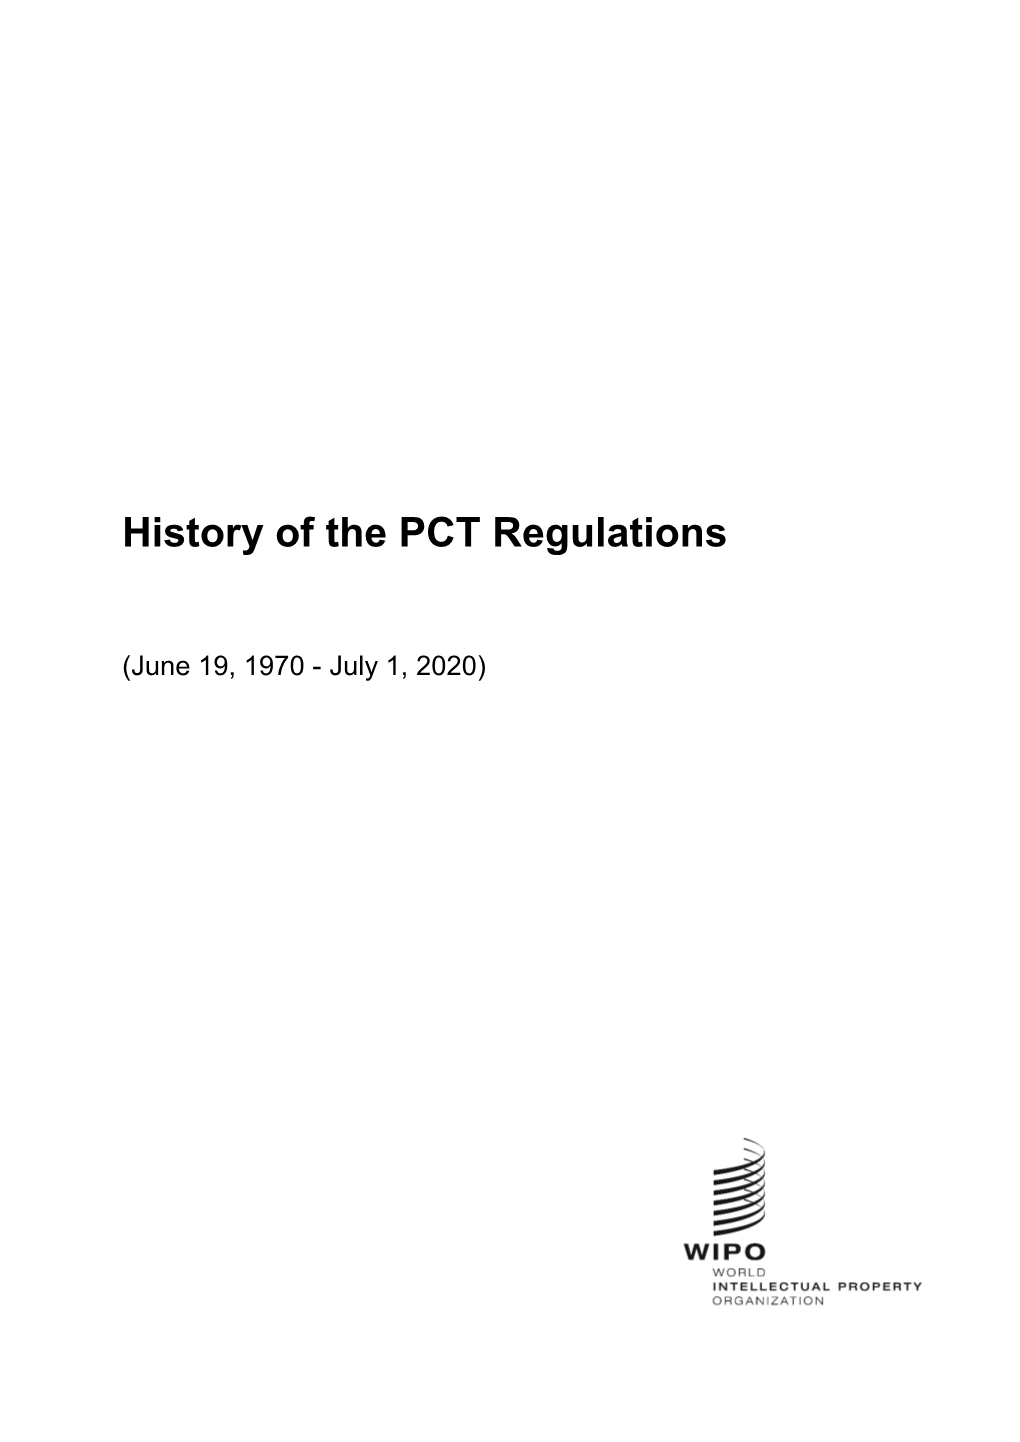 History of the PCT Regulations 1970-2020